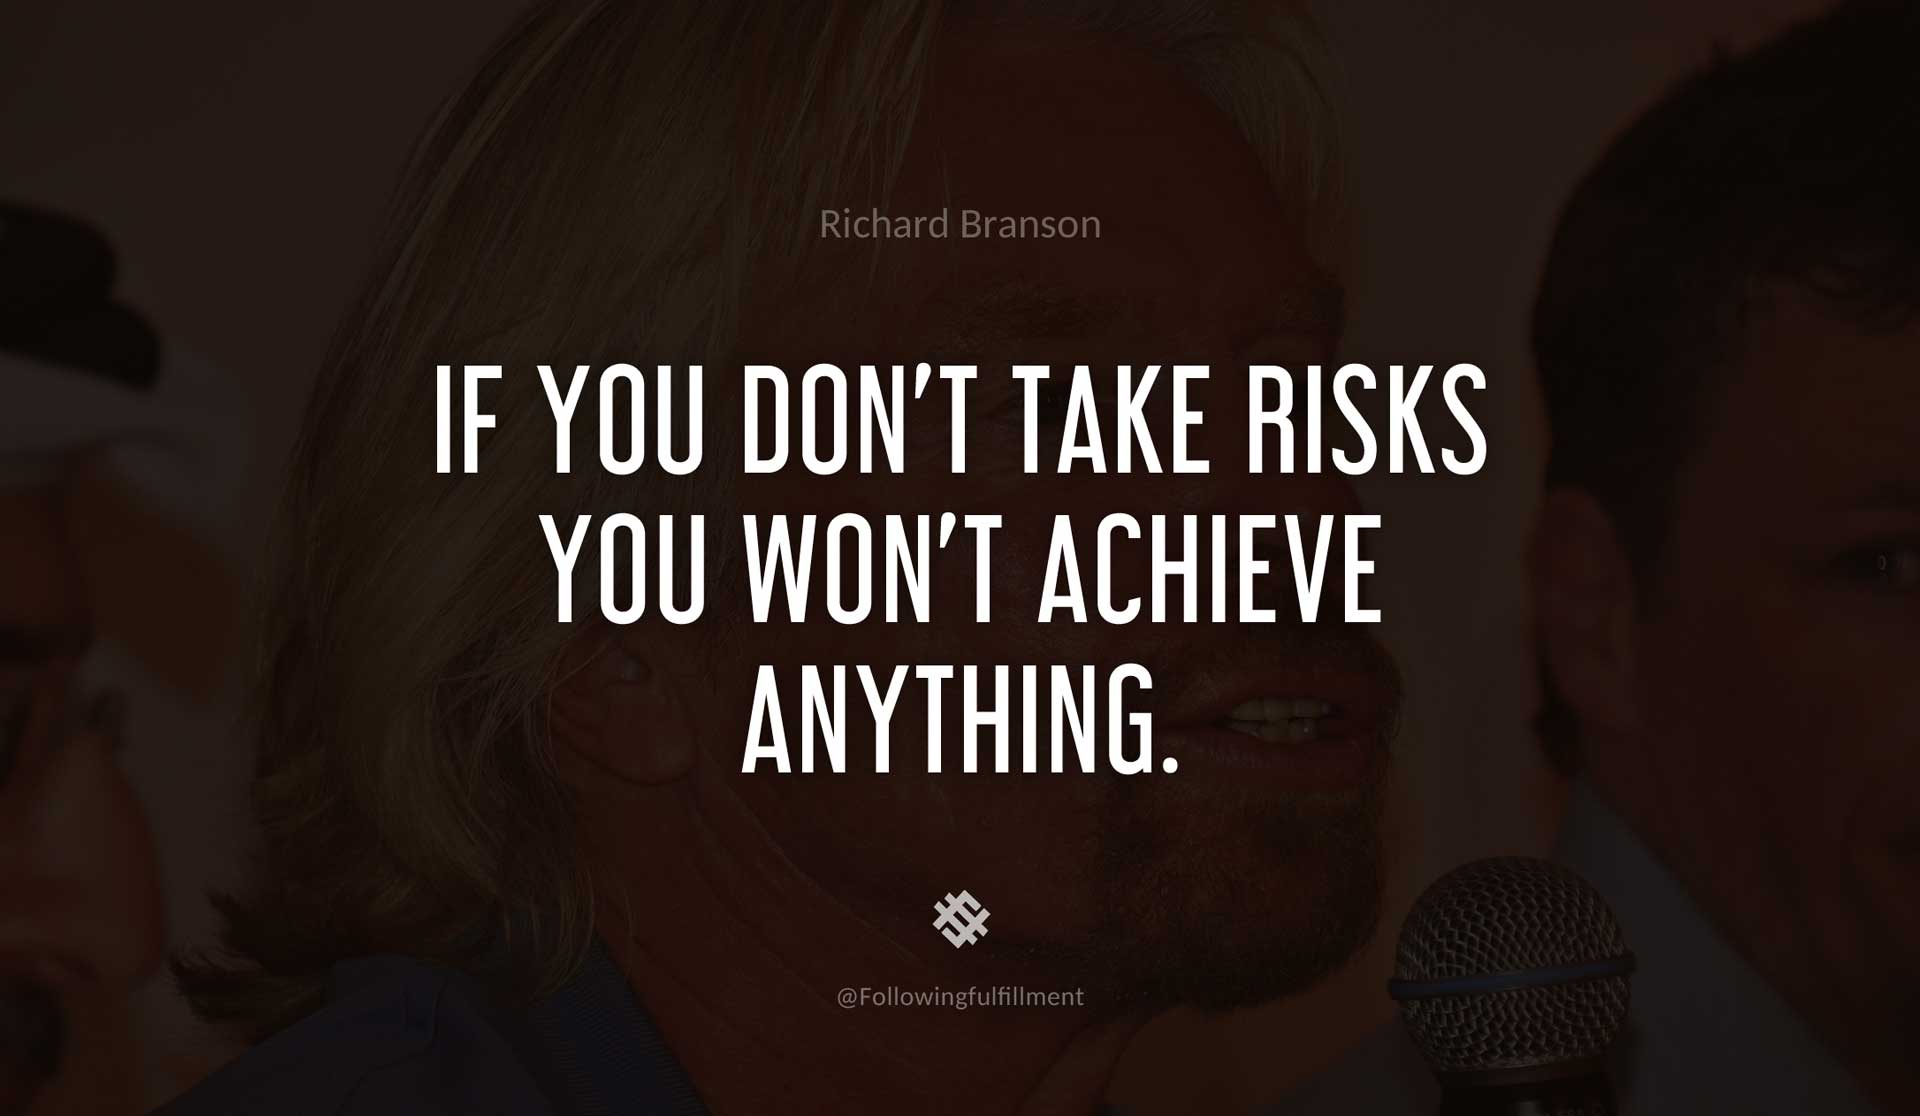 If-you-don't-take-risks-you-won't-achieve-anything.-RICHARD-BRANSON-Quote.jpg